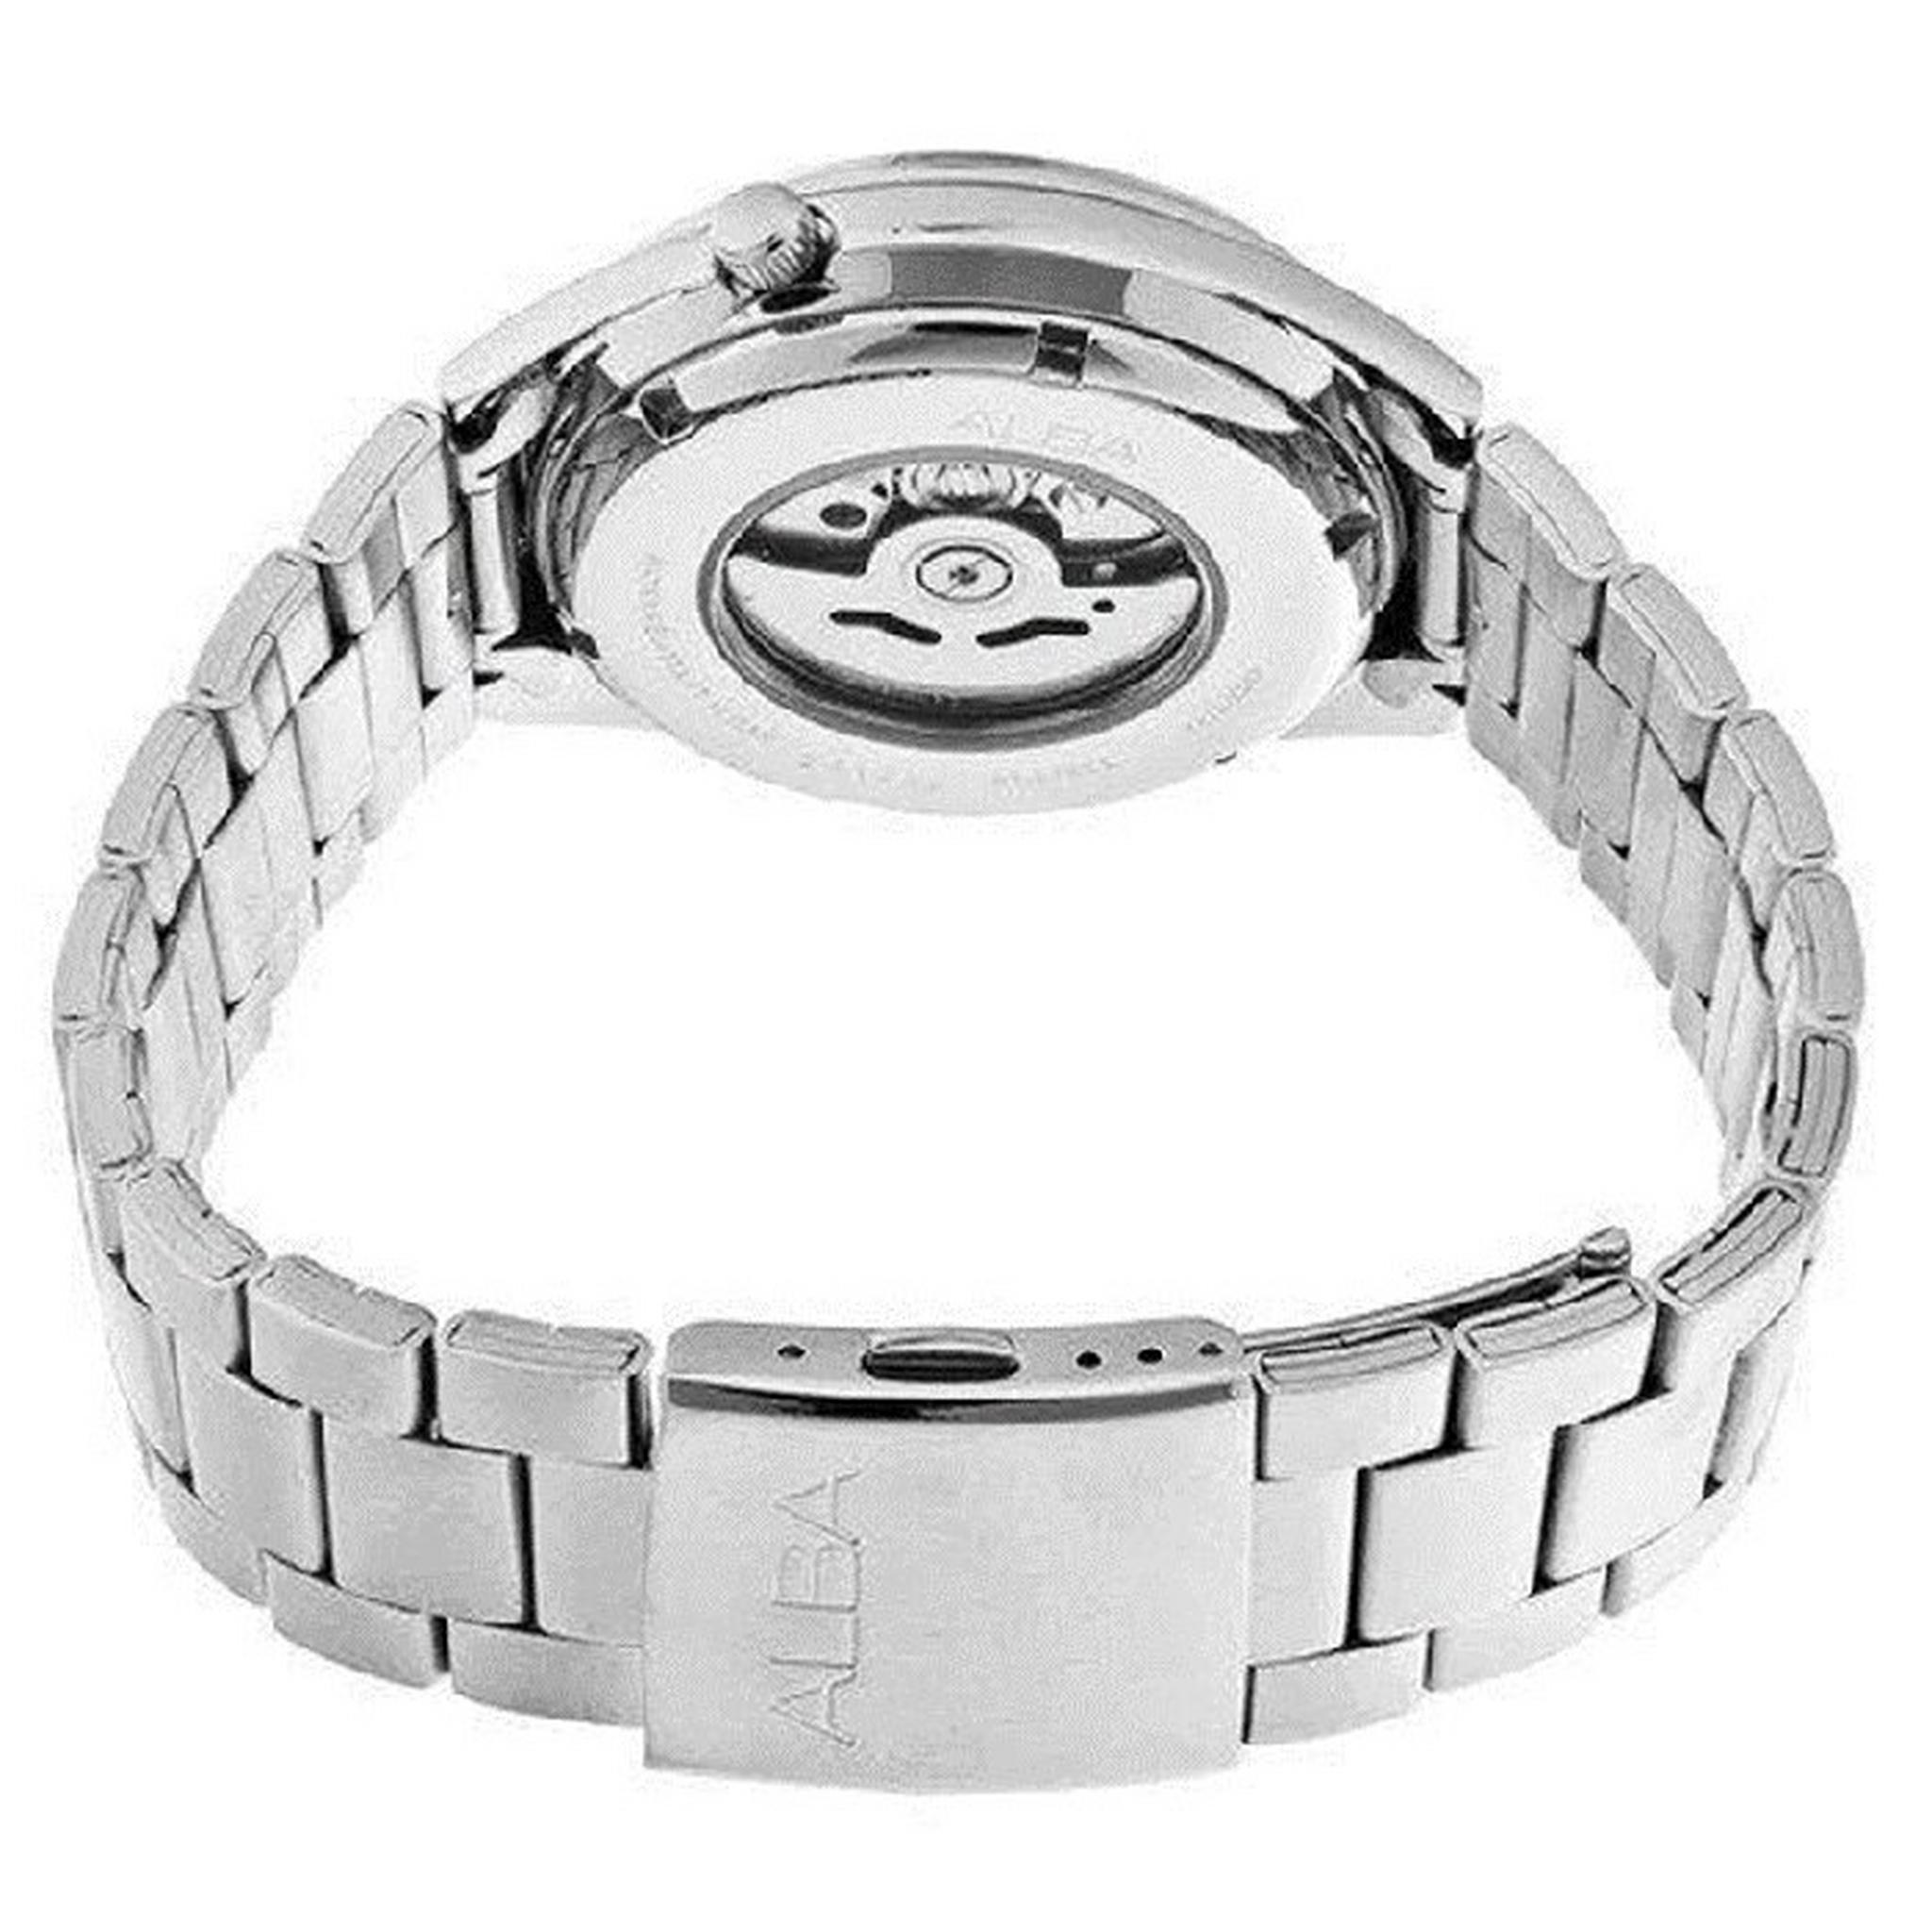 Alba Watch for Men, Analog, Stainless Steel, AL4323X1 - Silver